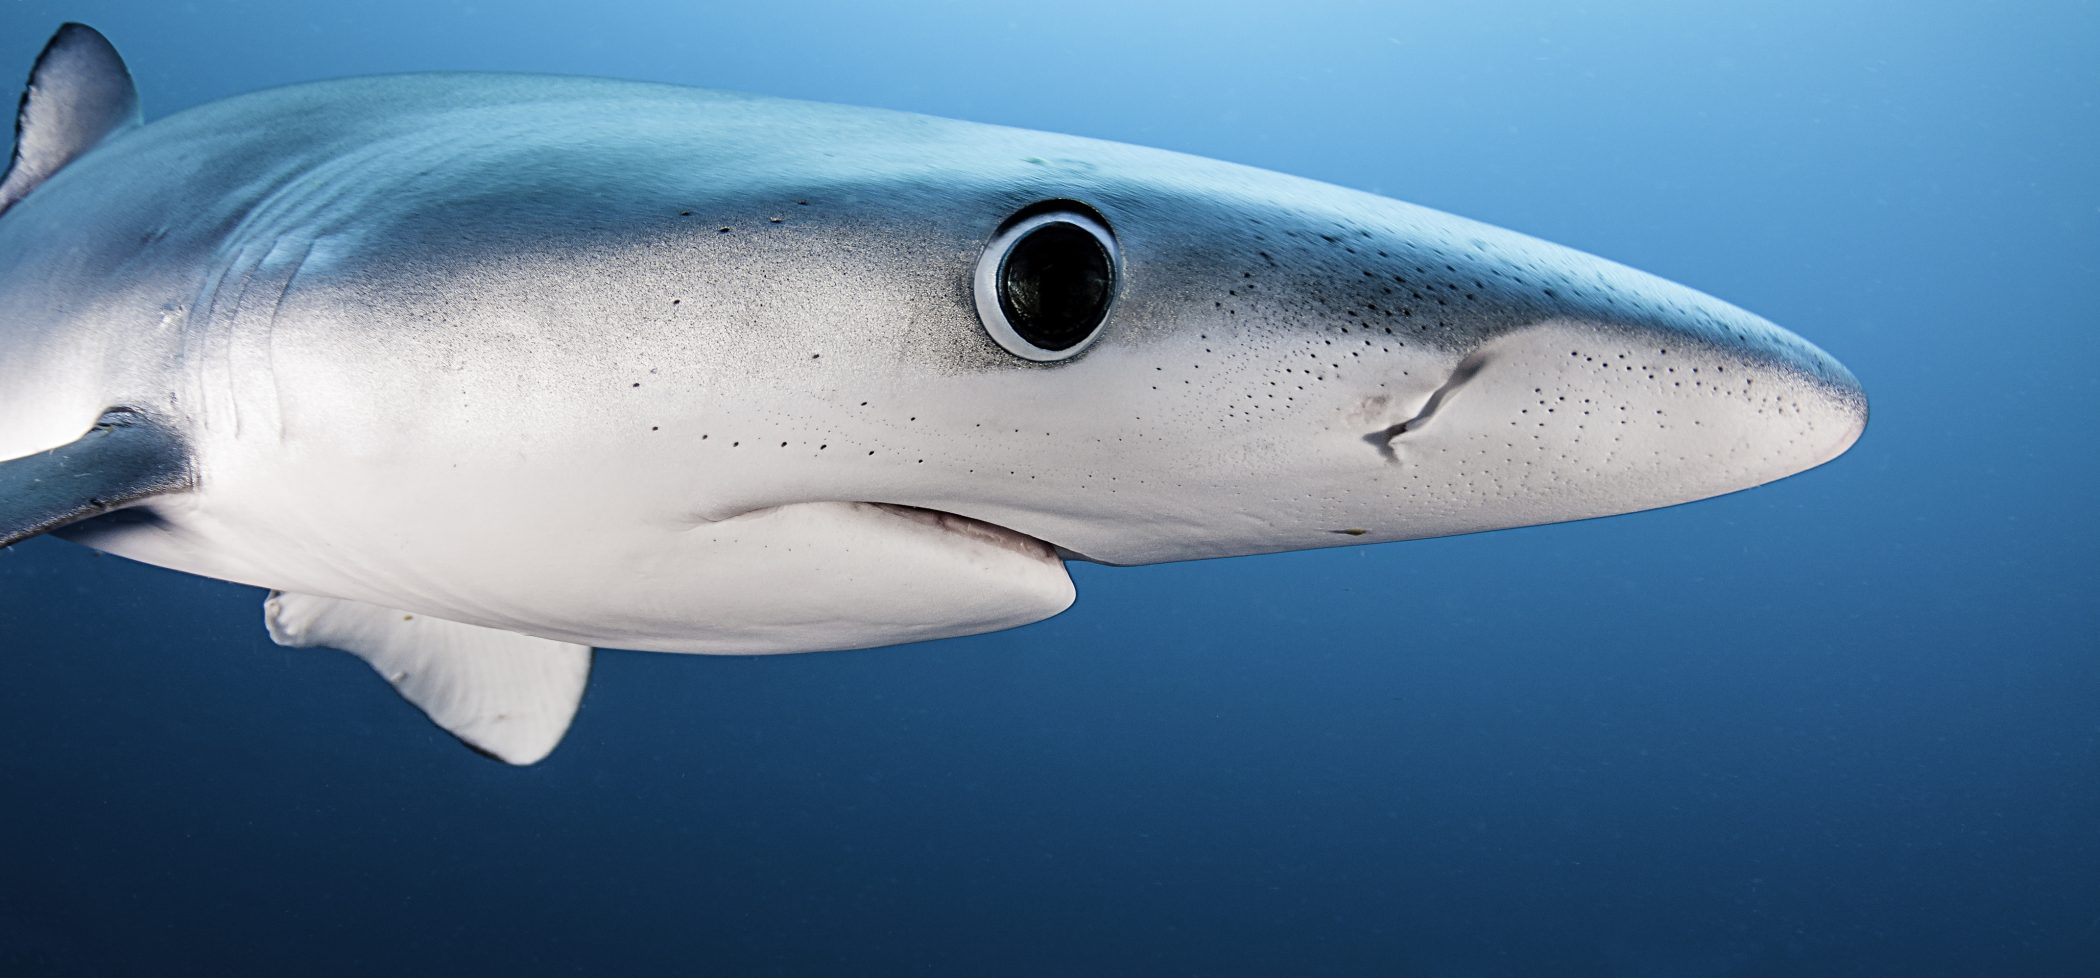 Close up view of the face of a blue shark showing details of the eye, mouth and sensors in it's snout. This image was taken on a baited shark dive 50 kms offshore past Western Cape.